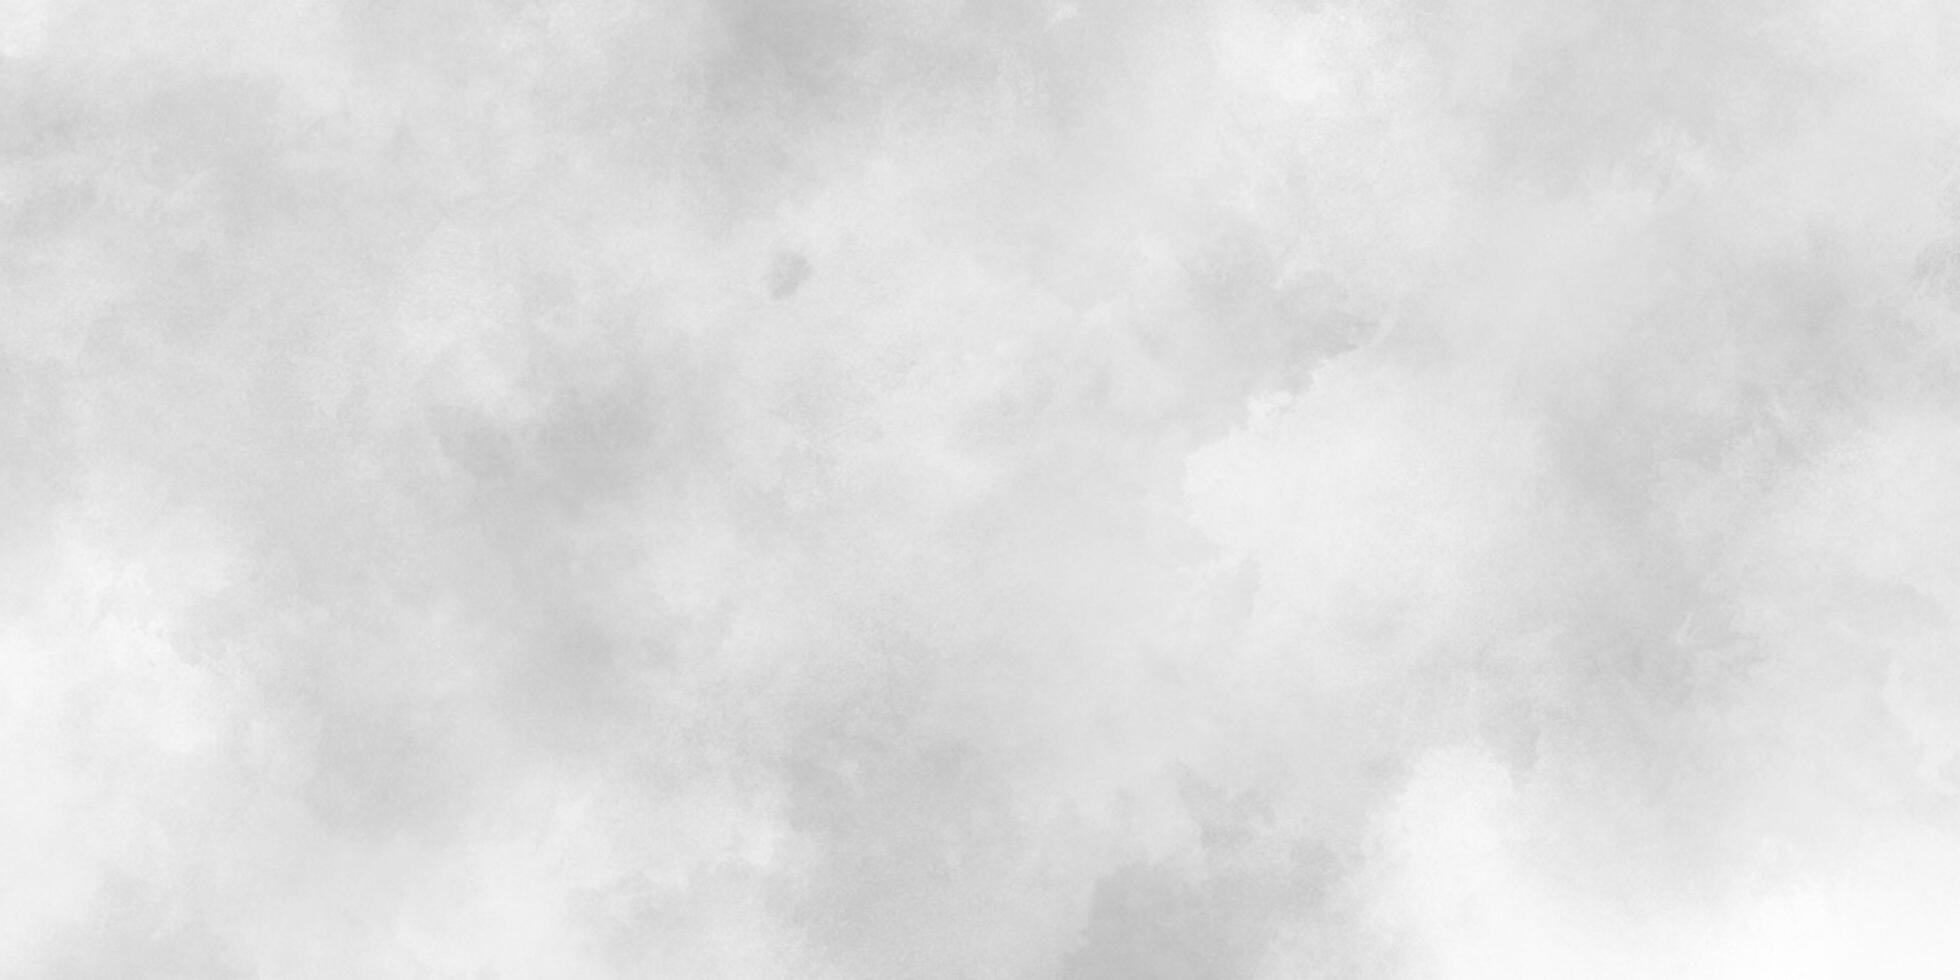 White cloudy sky or cloudscape or fogg, black and white gradient watercolor background, Concrete Art Rough Stylized cloudy white paper texture, Grunge clouds or smog texture with stains. photo